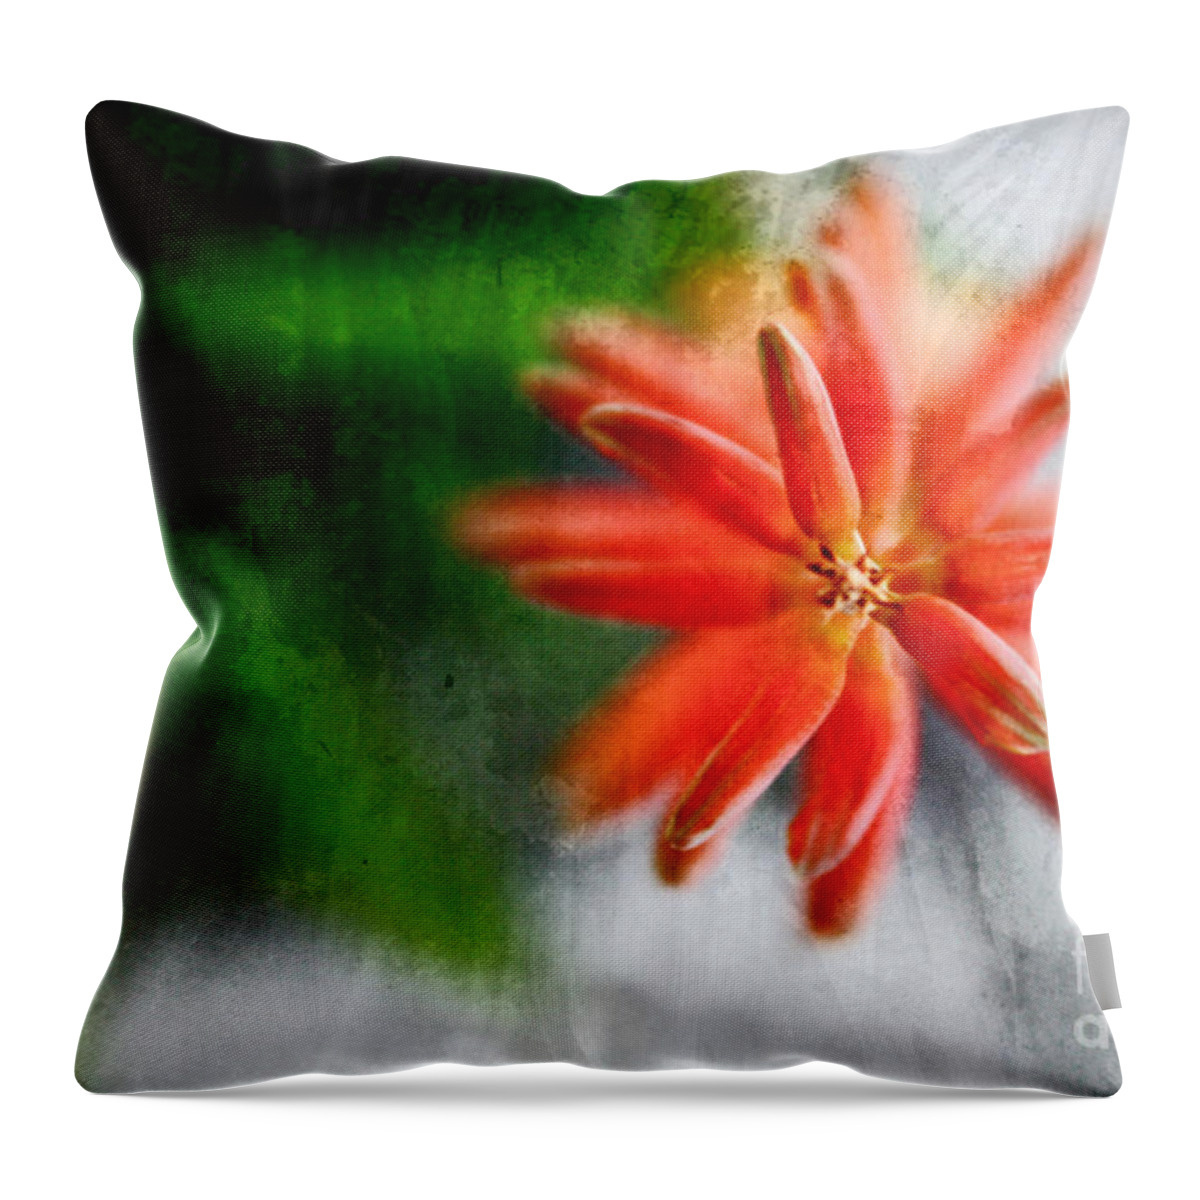 Green Throw Pillow featuring the photograph Green and Orange by Sandy Moulder